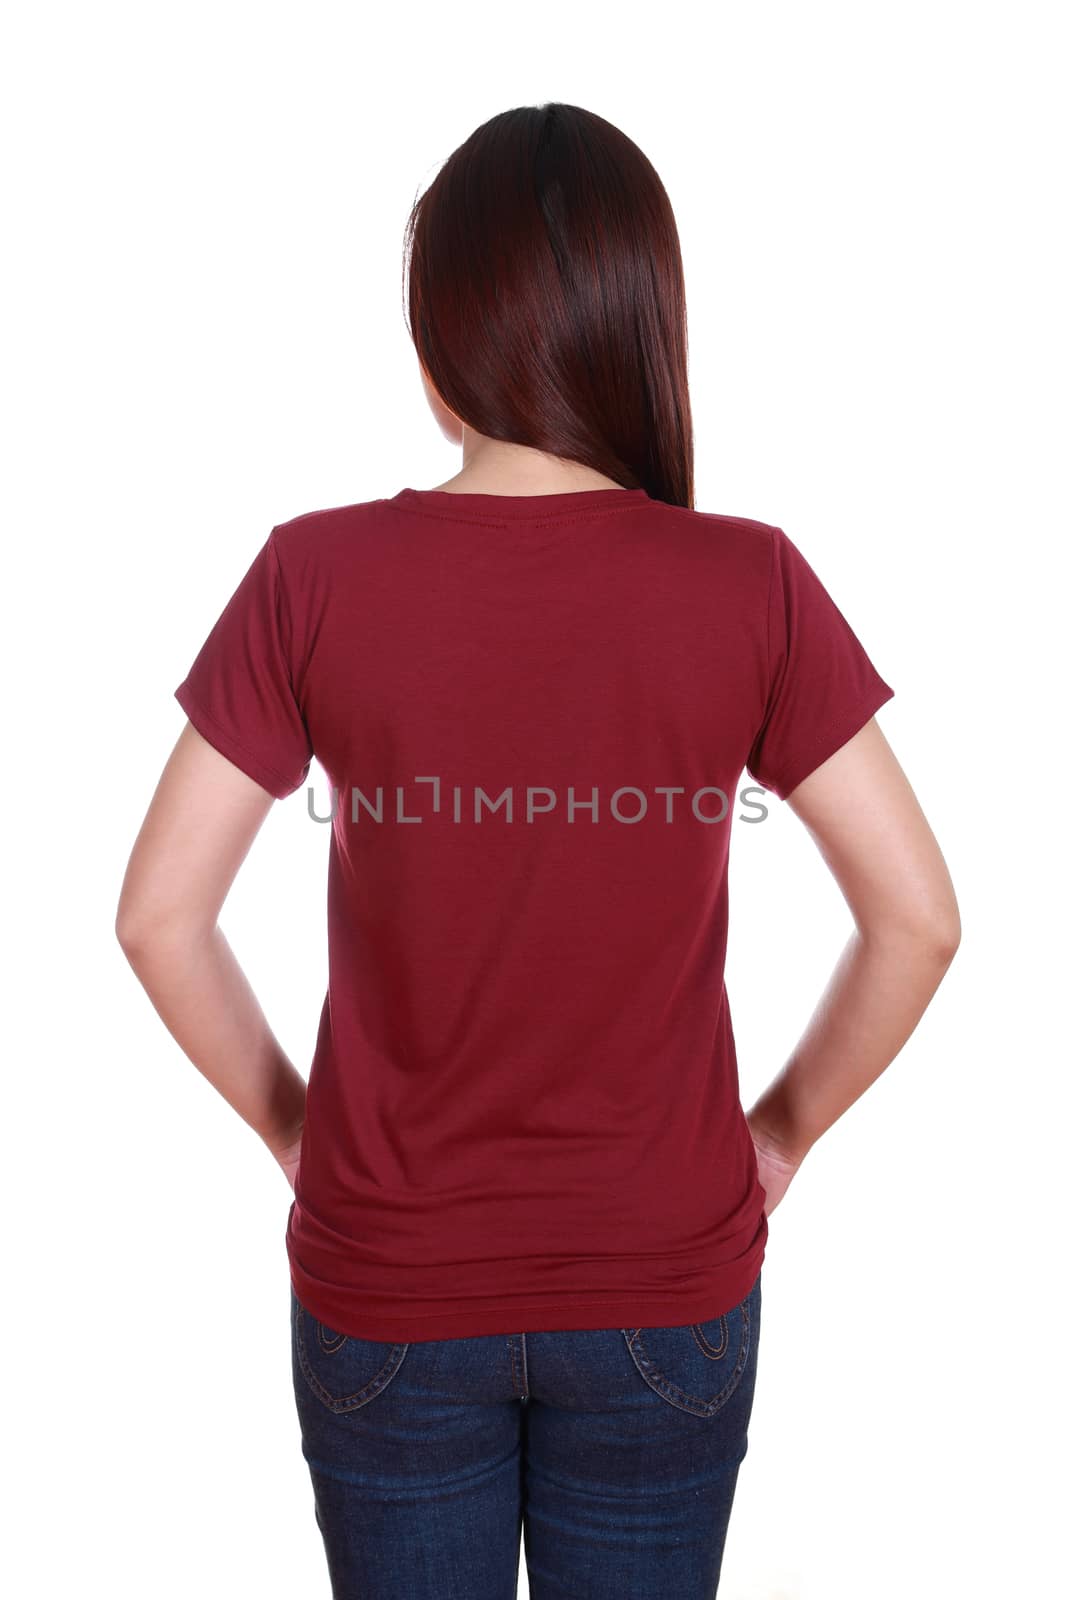 female with blank red t-shirt (back side) isolated on white background